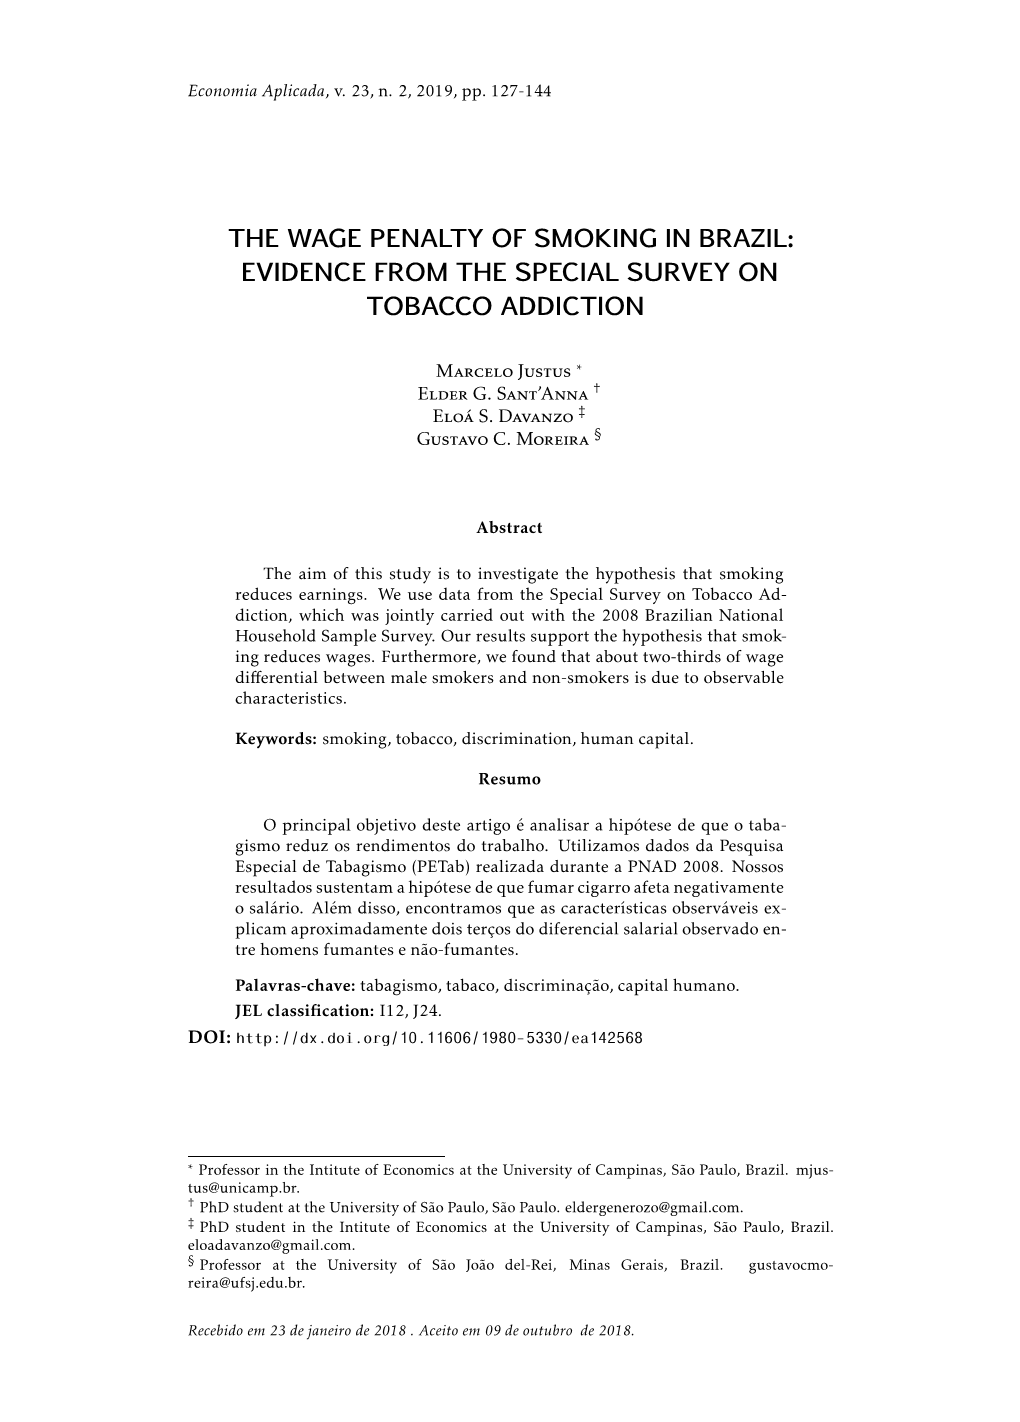 The Wage Penalty of Smoking in Brazil: Evidence from the Special Survey on Tobacco Addiction